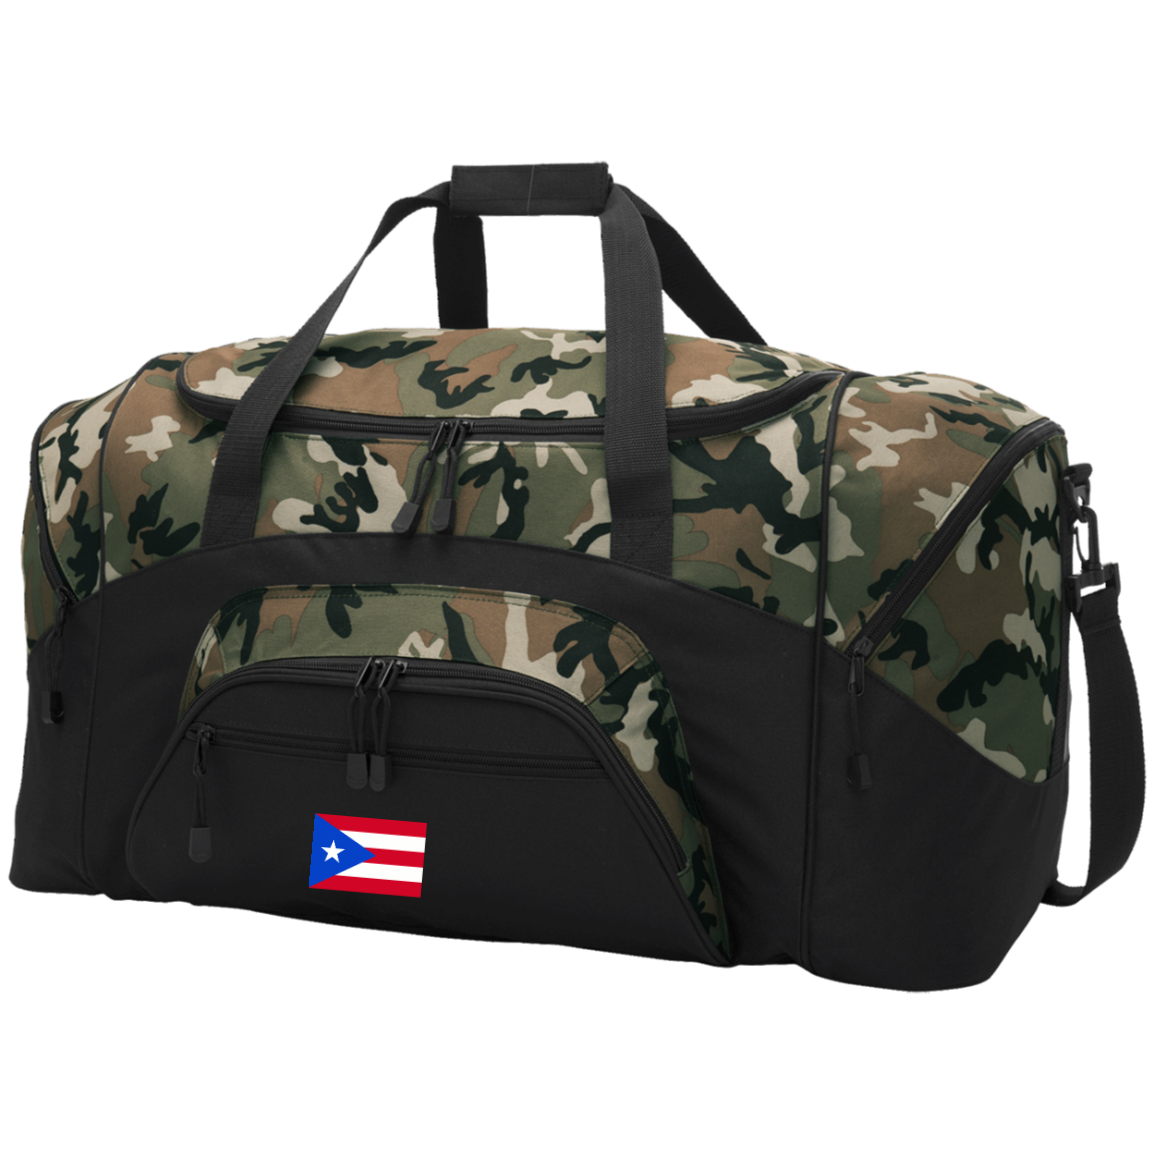 Sport Duffel Bag - Embroidered Puerto Rican Flag